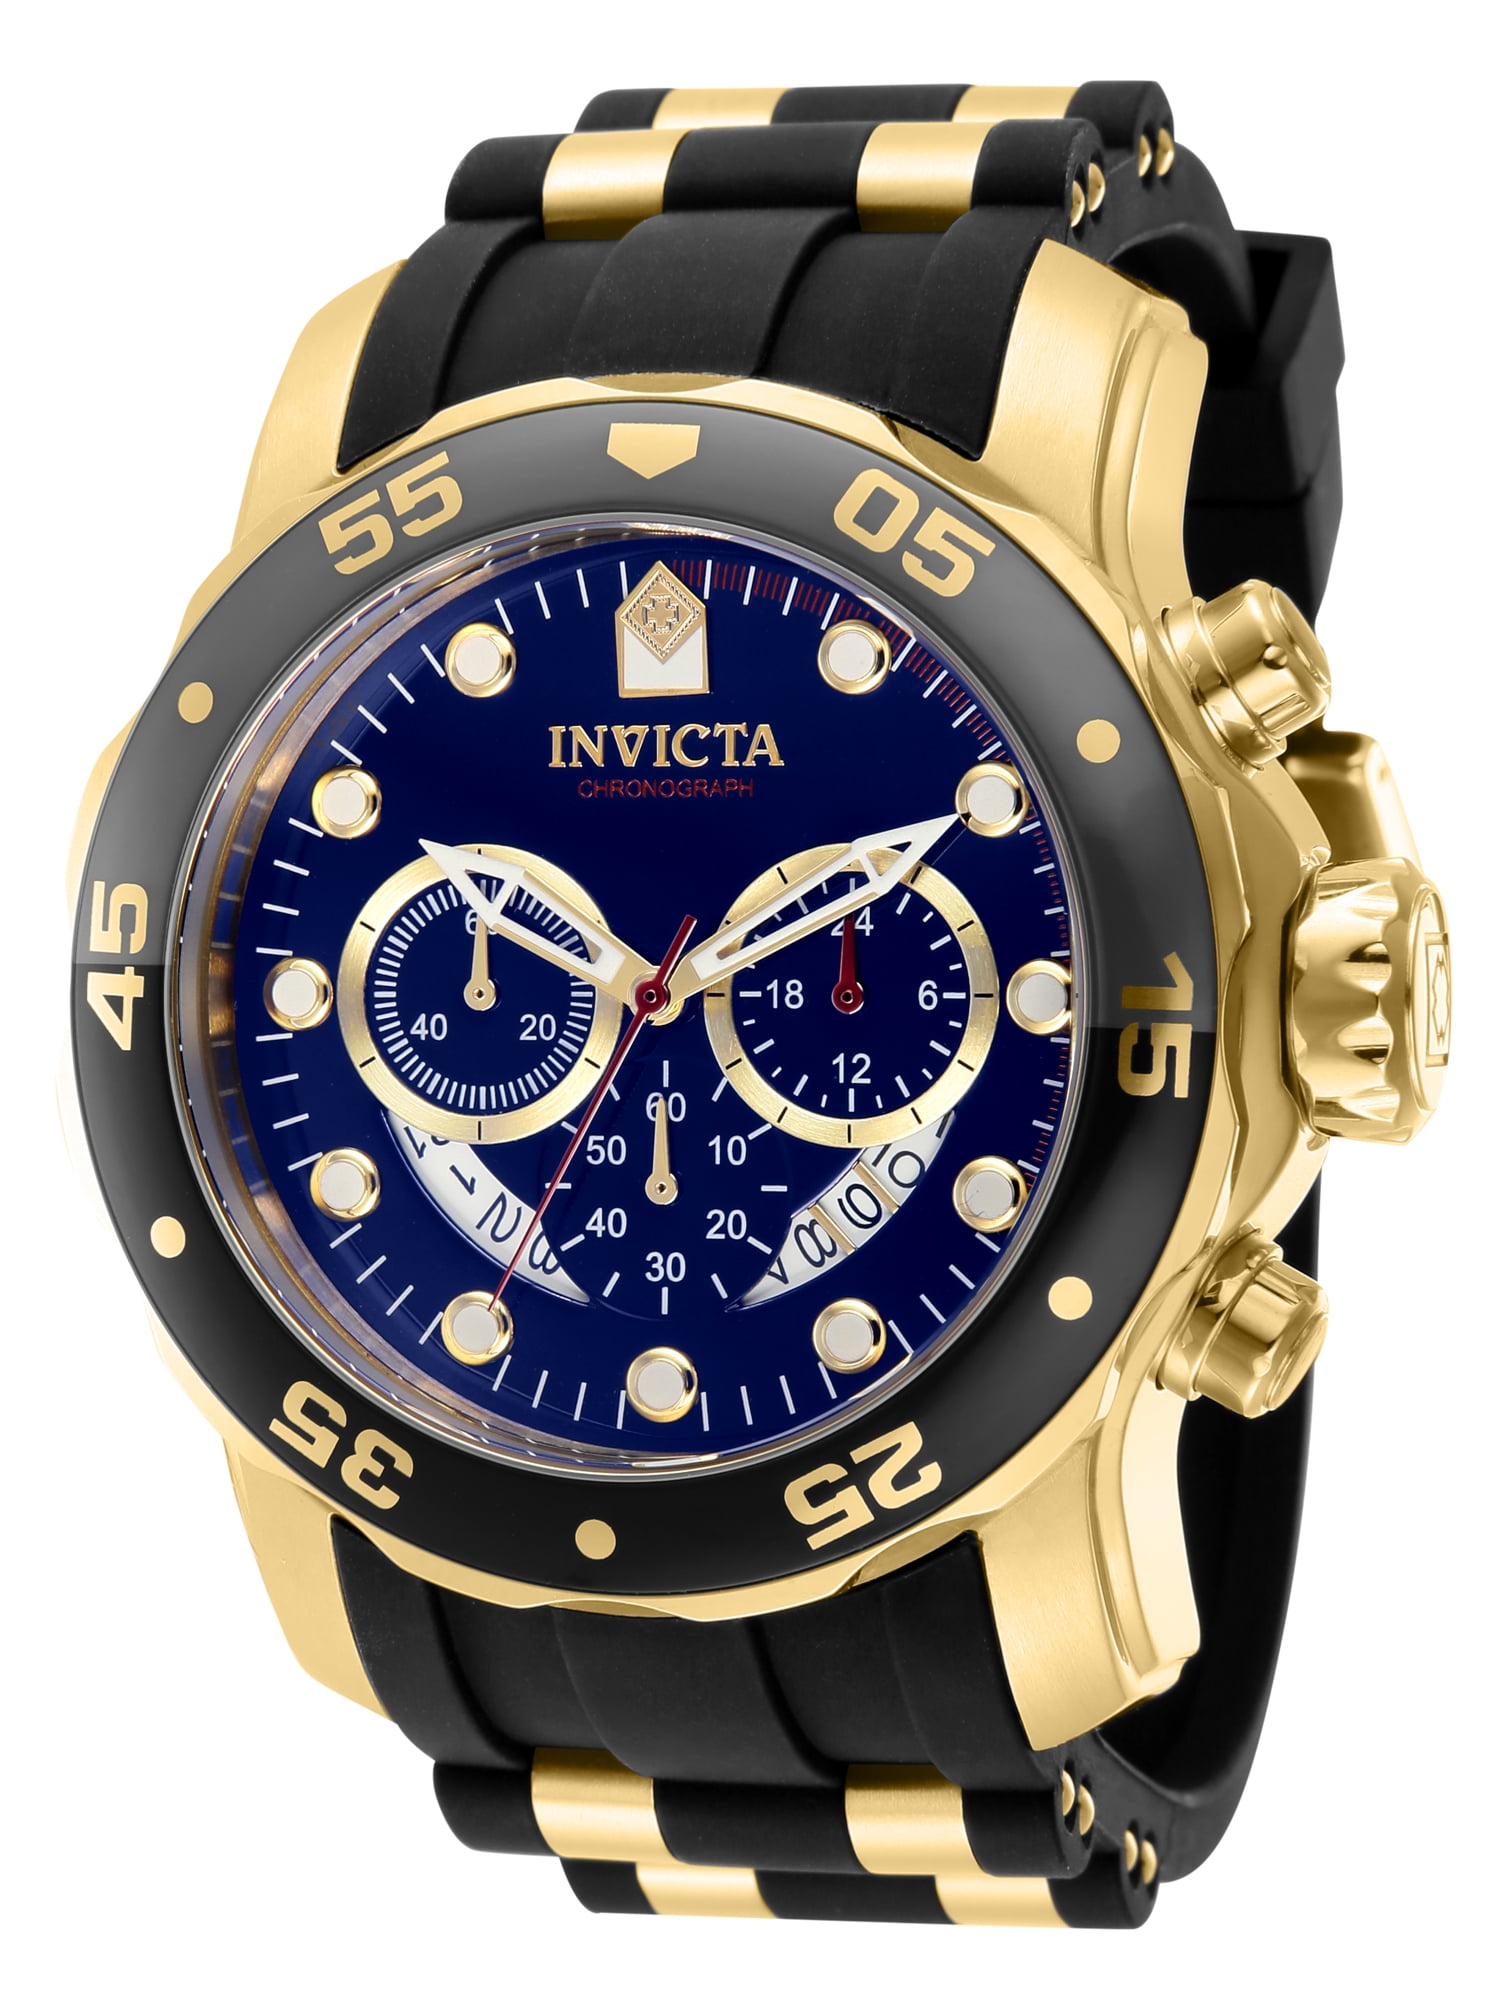 Invicta Pro Diver 48mm Stainless Steel Band, Black dial Quartz Watch